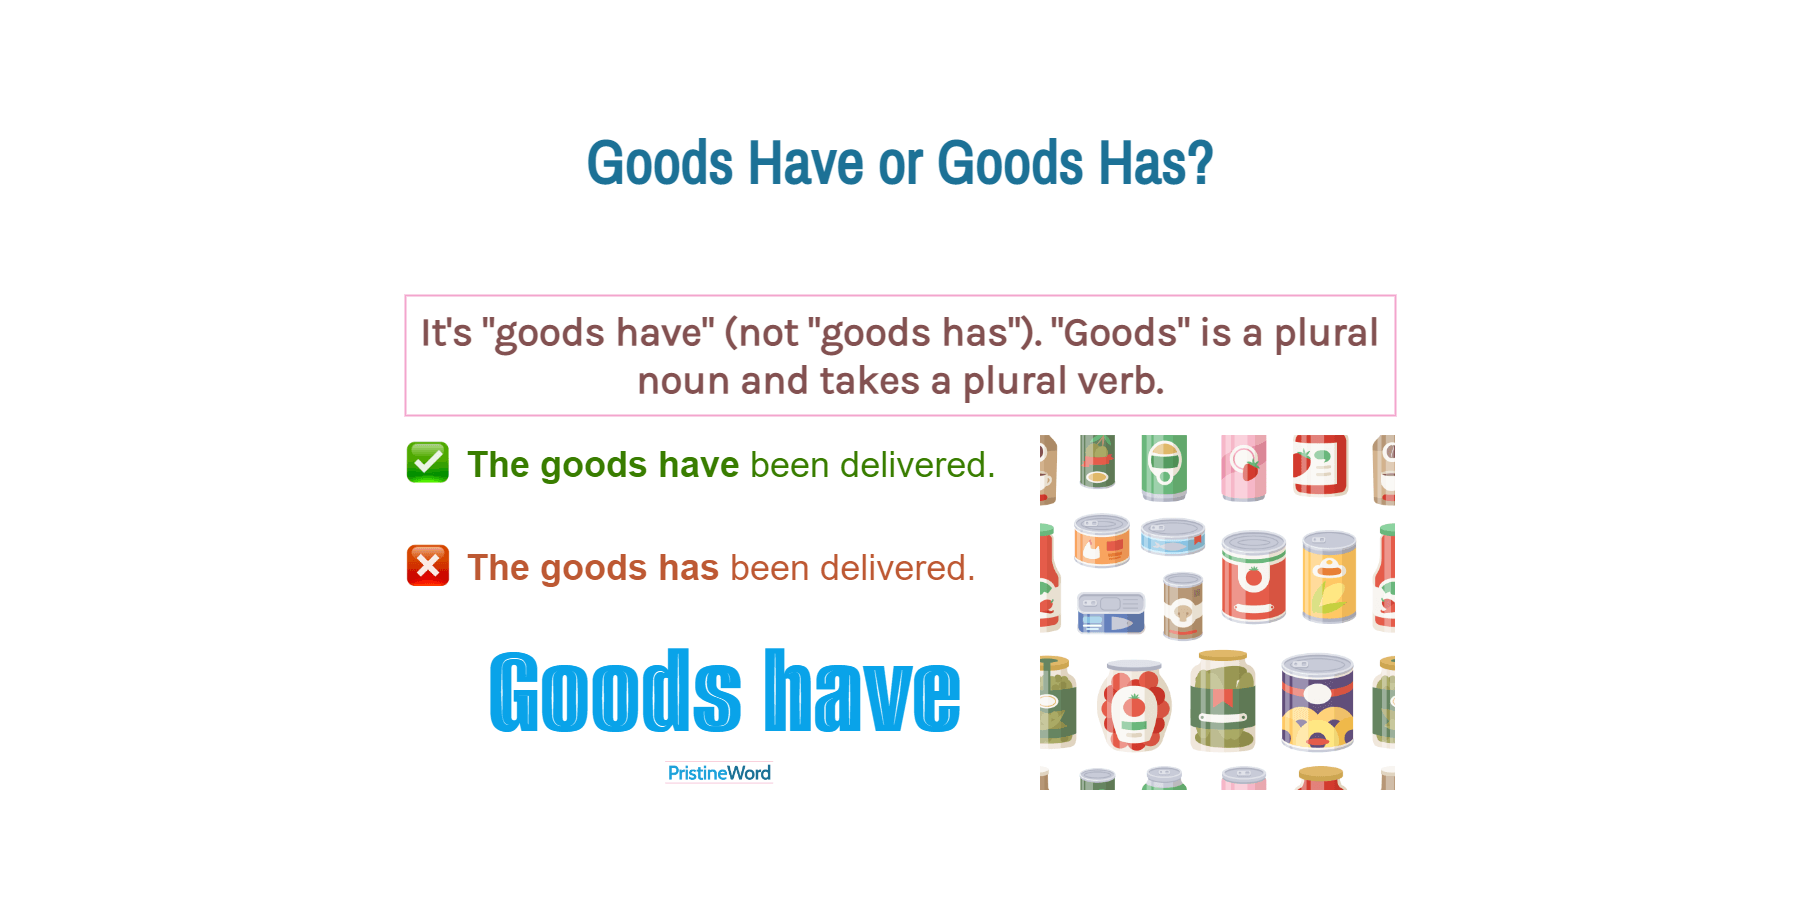 Goods Have or Goods has. Which Is Correct?